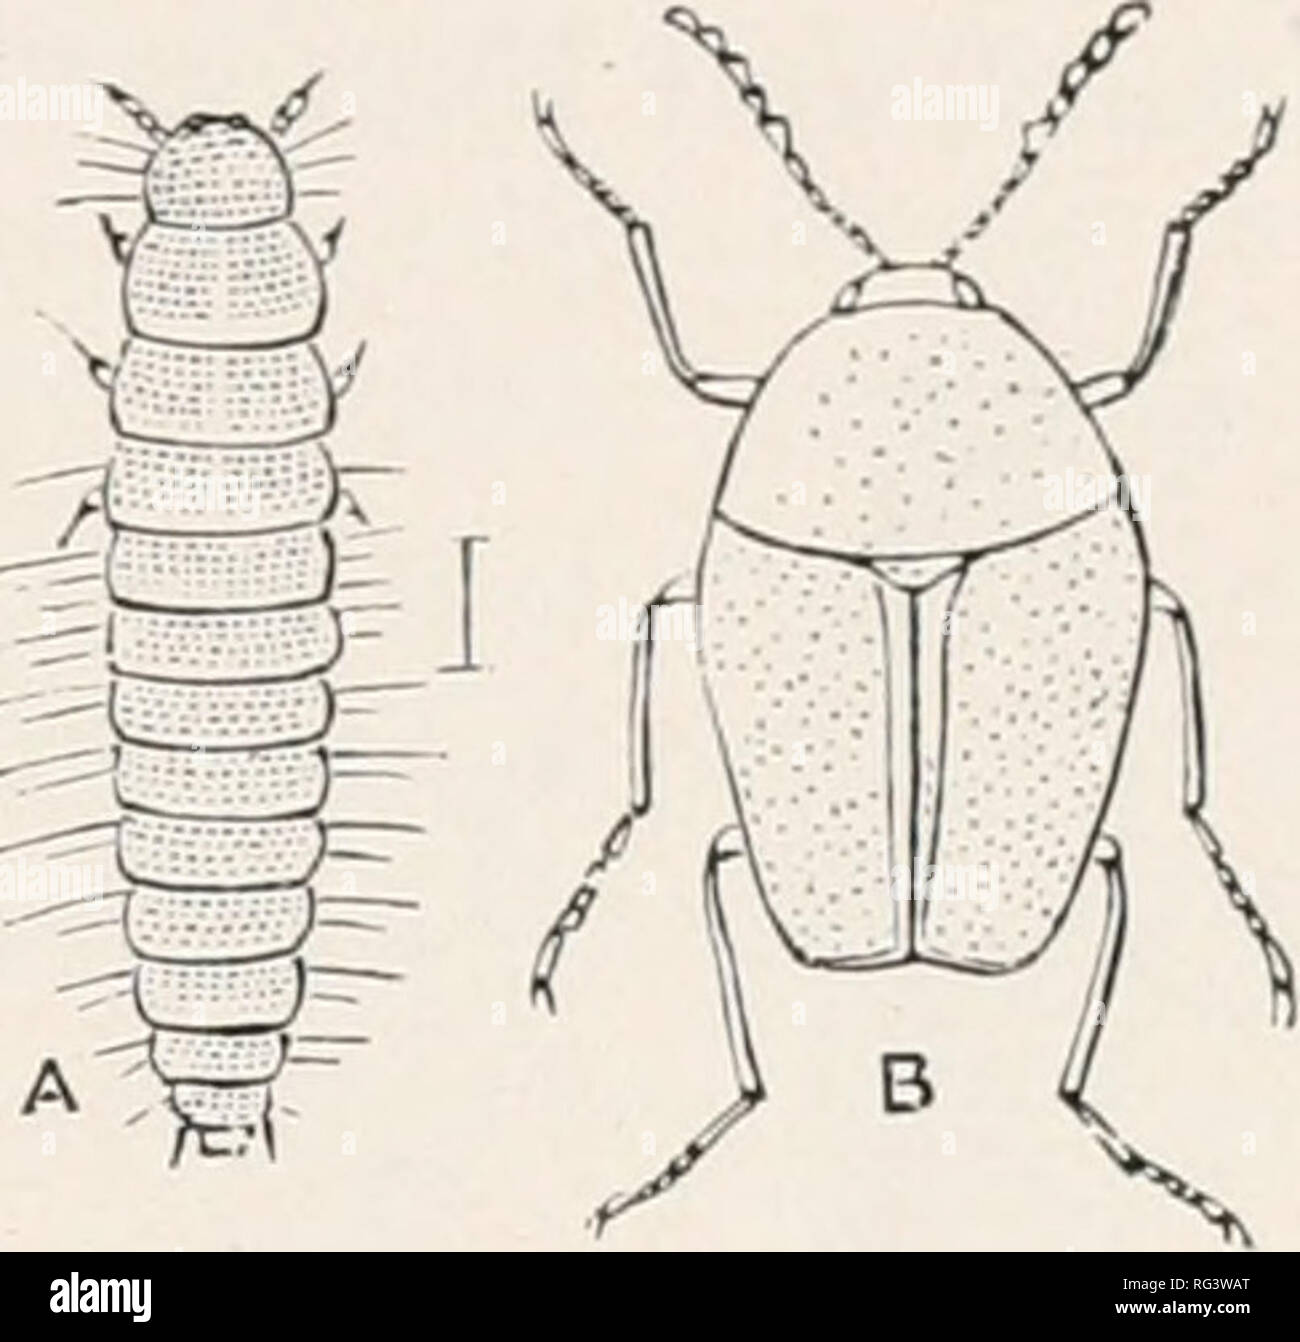 . The Cambridge natural history. Zoology. rOLYMORPRA SCAPHIDIIDAEâSYNTELIIDAE 229. Fig. 108.âSccqMsoma ufjari- cinum. Britain. A Larva (after Perris) ; B perfect Insect. Fam. 24. Scaphidiidae.âFront coxae small, conical; lorotliorax 'ccri/ closely applied lo the after-ho dy ; hind coxae transverse, tridely separated: edxlomen with six or seven visible ventred p)f((fes; antennae at the extremity irith edjout Jive joints that heconie (jraduedly hroader. Tarsi Jive-Jointed. This family consists of a few beetles that live in fungi, and run with extreme rapidity ; they are all small, and usually ra Stock Photo